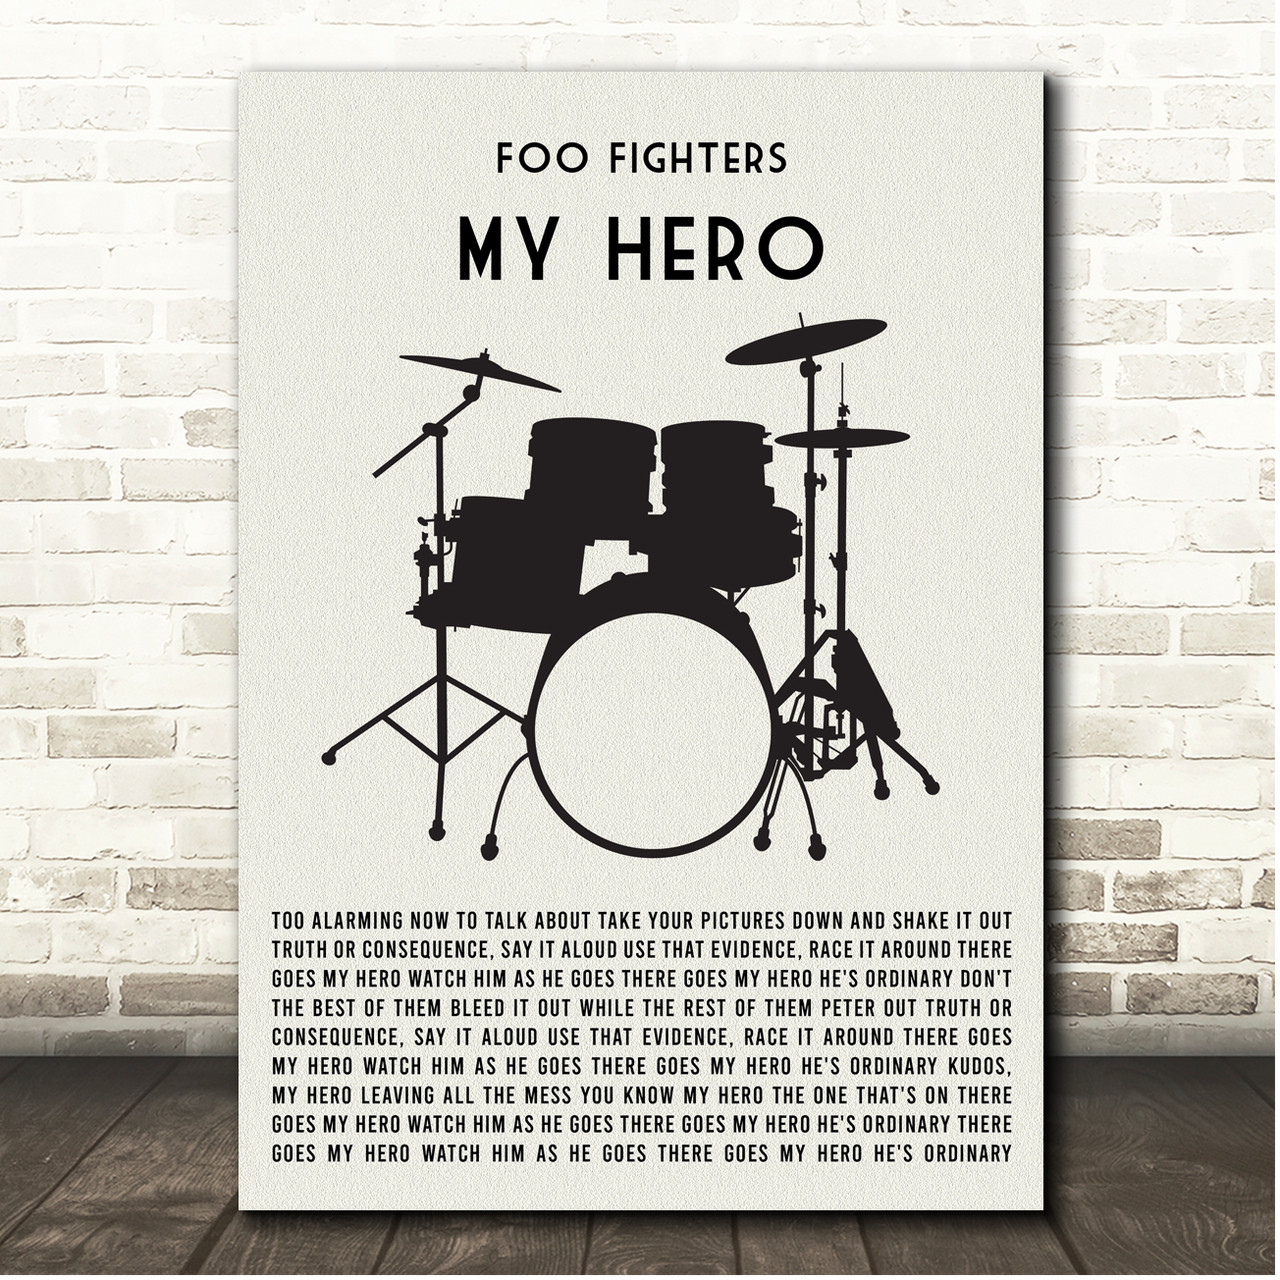 My Hero (Acoustic Cover) [Originally performed by Foo Fighters] - song and  lyrics by Not For Long